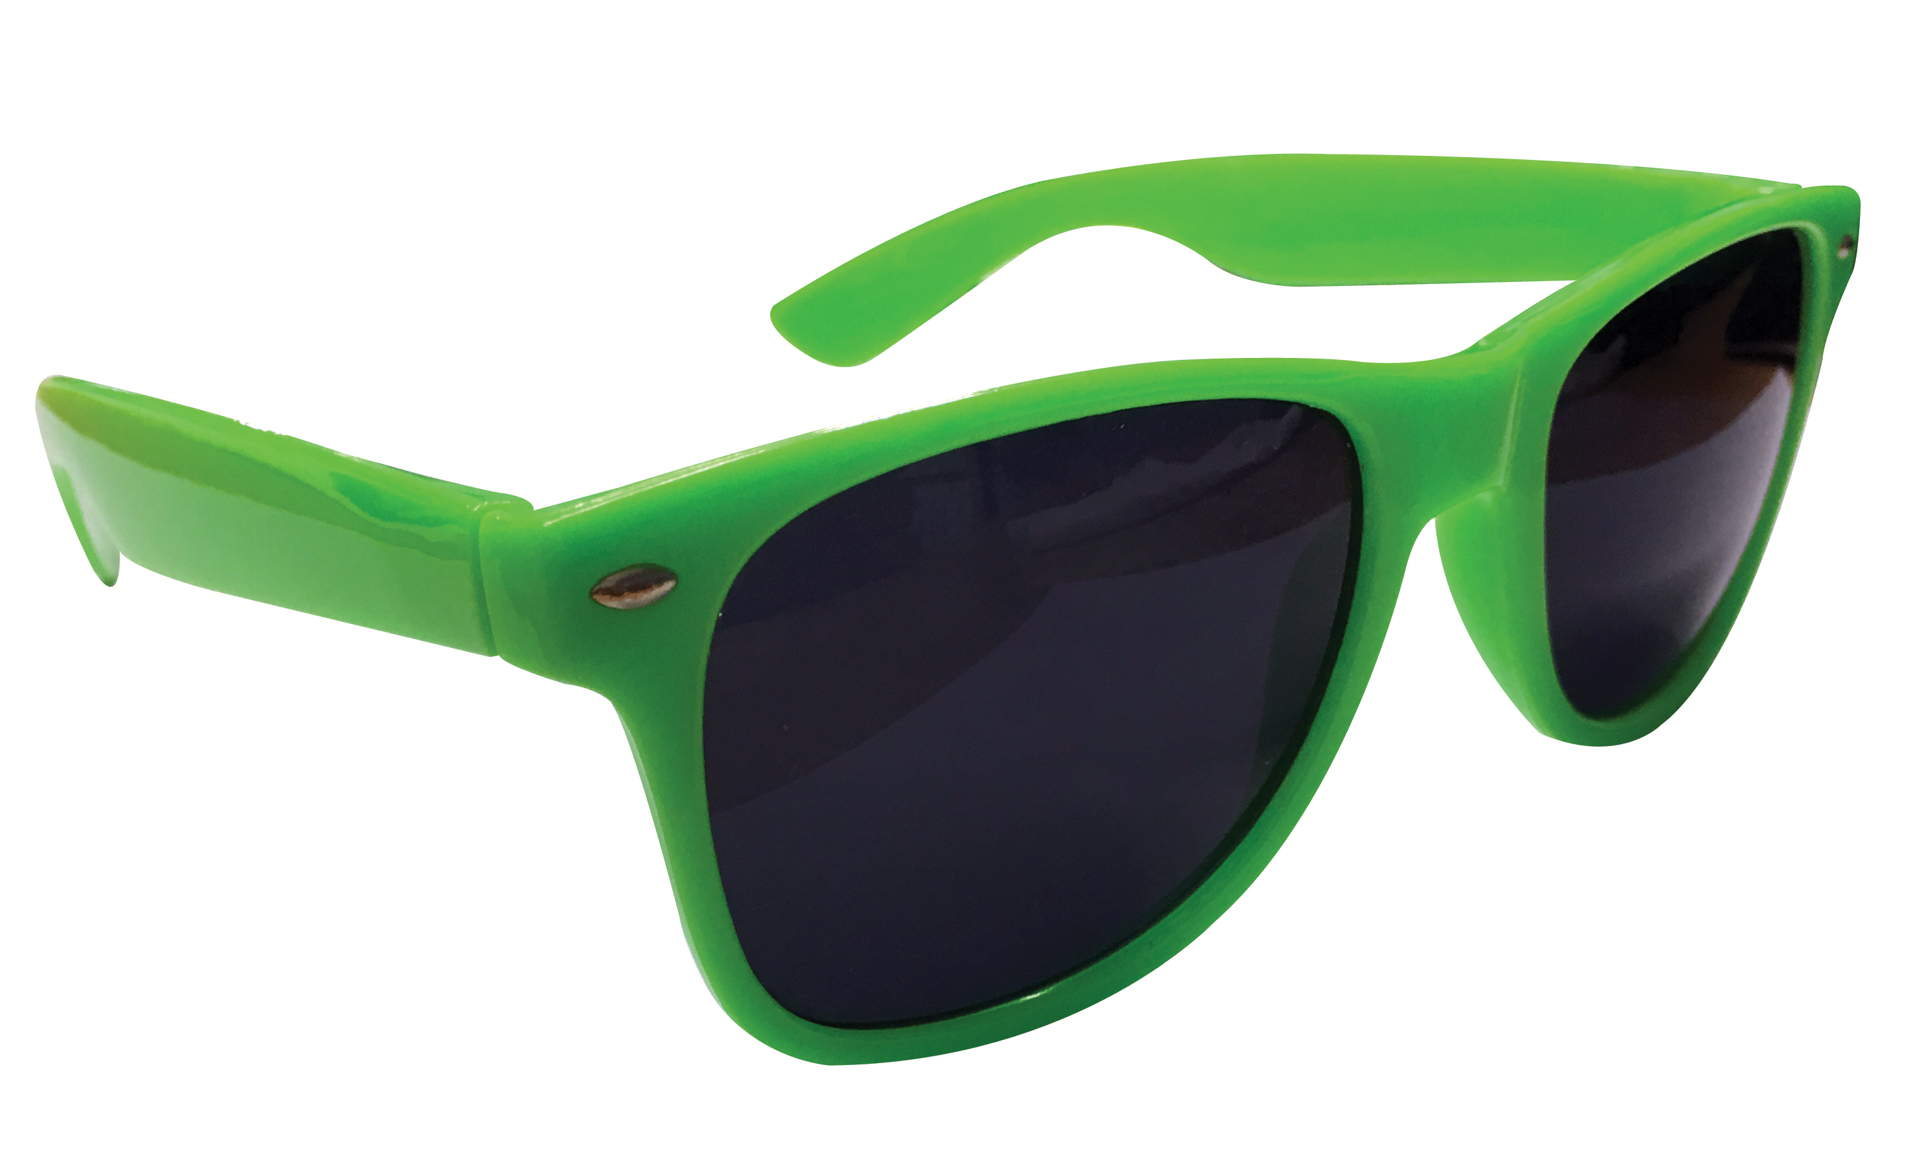 Pantone Matched Sunglasses in green